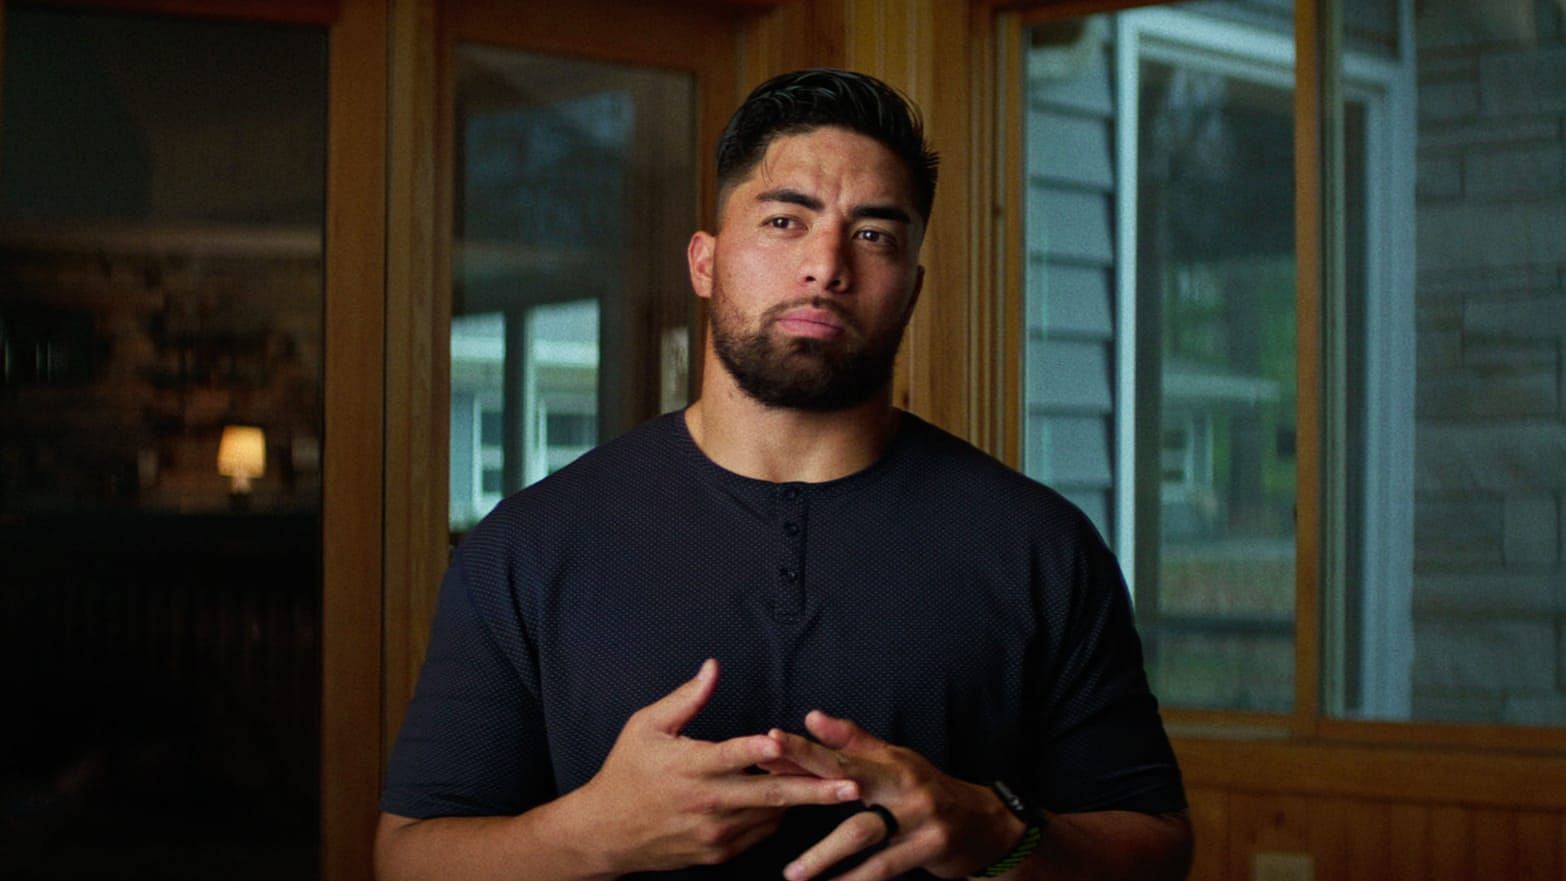 Former linebacker and Notre Dame star Manti Te